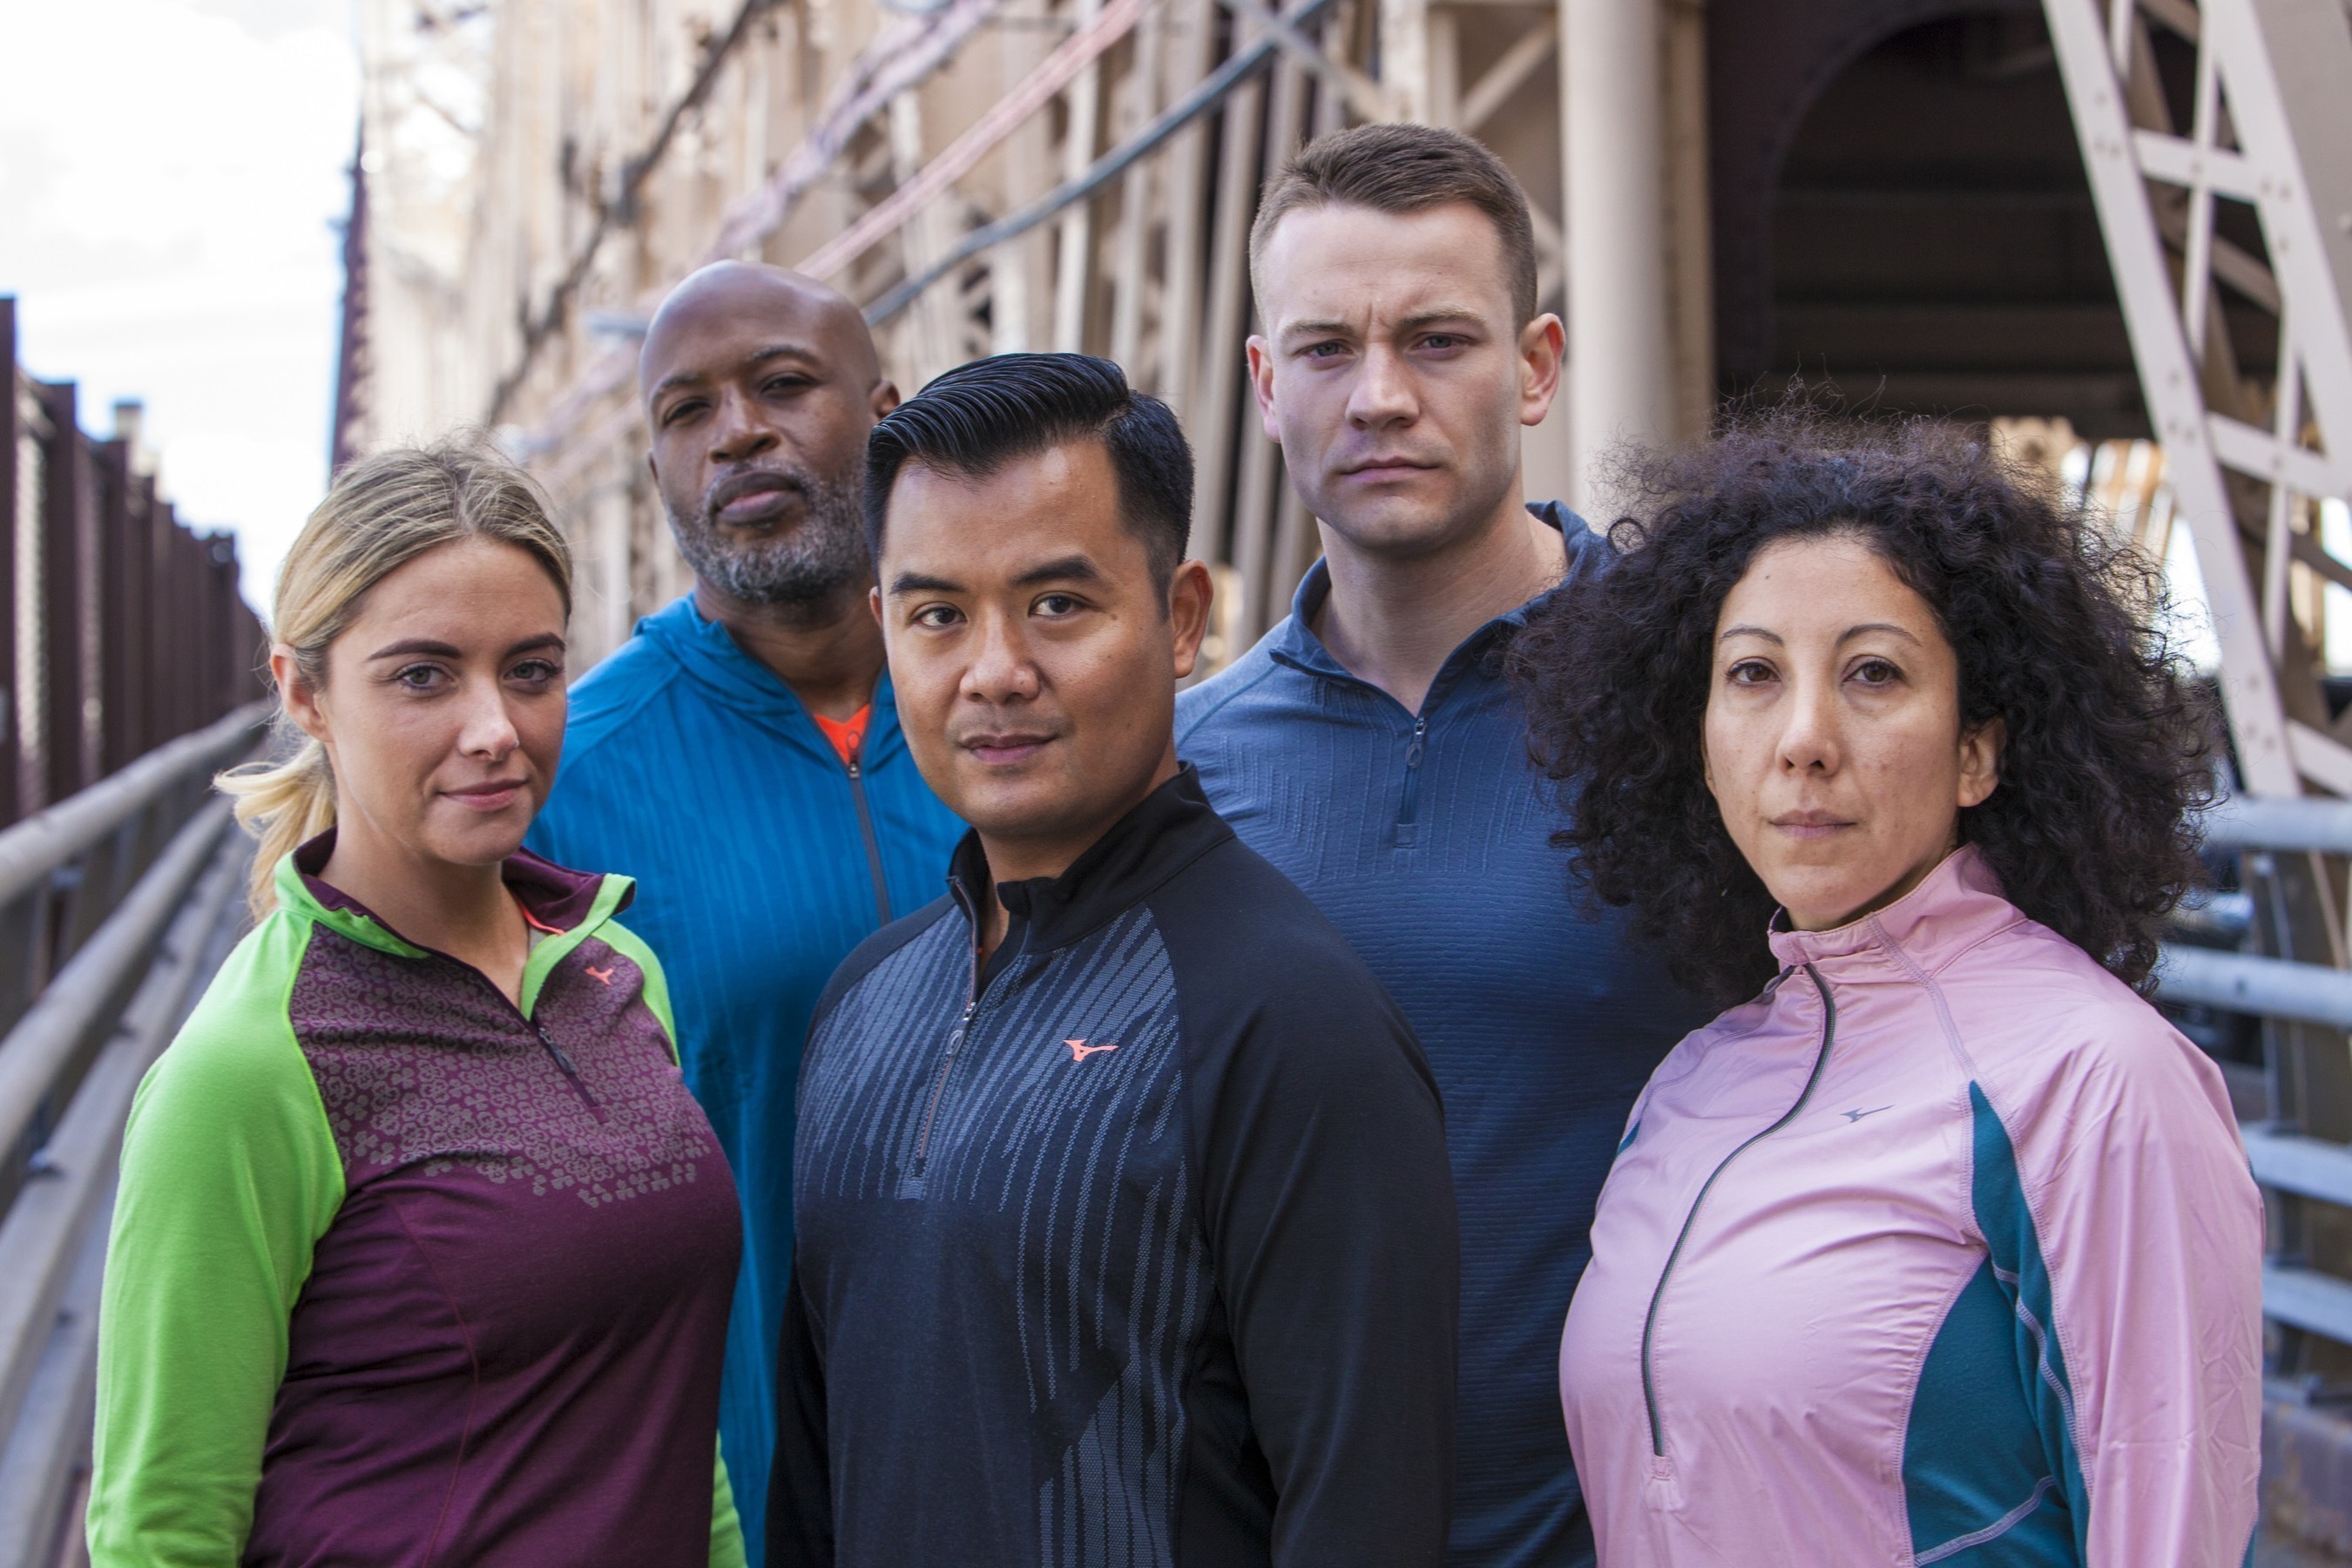 Mizuno's Team Inspire members set out to inspire others throughout their 26.2-mile journey at the New York City Marathon. From left to right: Carley Houser, Kovon Flowers, Leo Fernandez, Doug Cobb and Susana Montesinos.